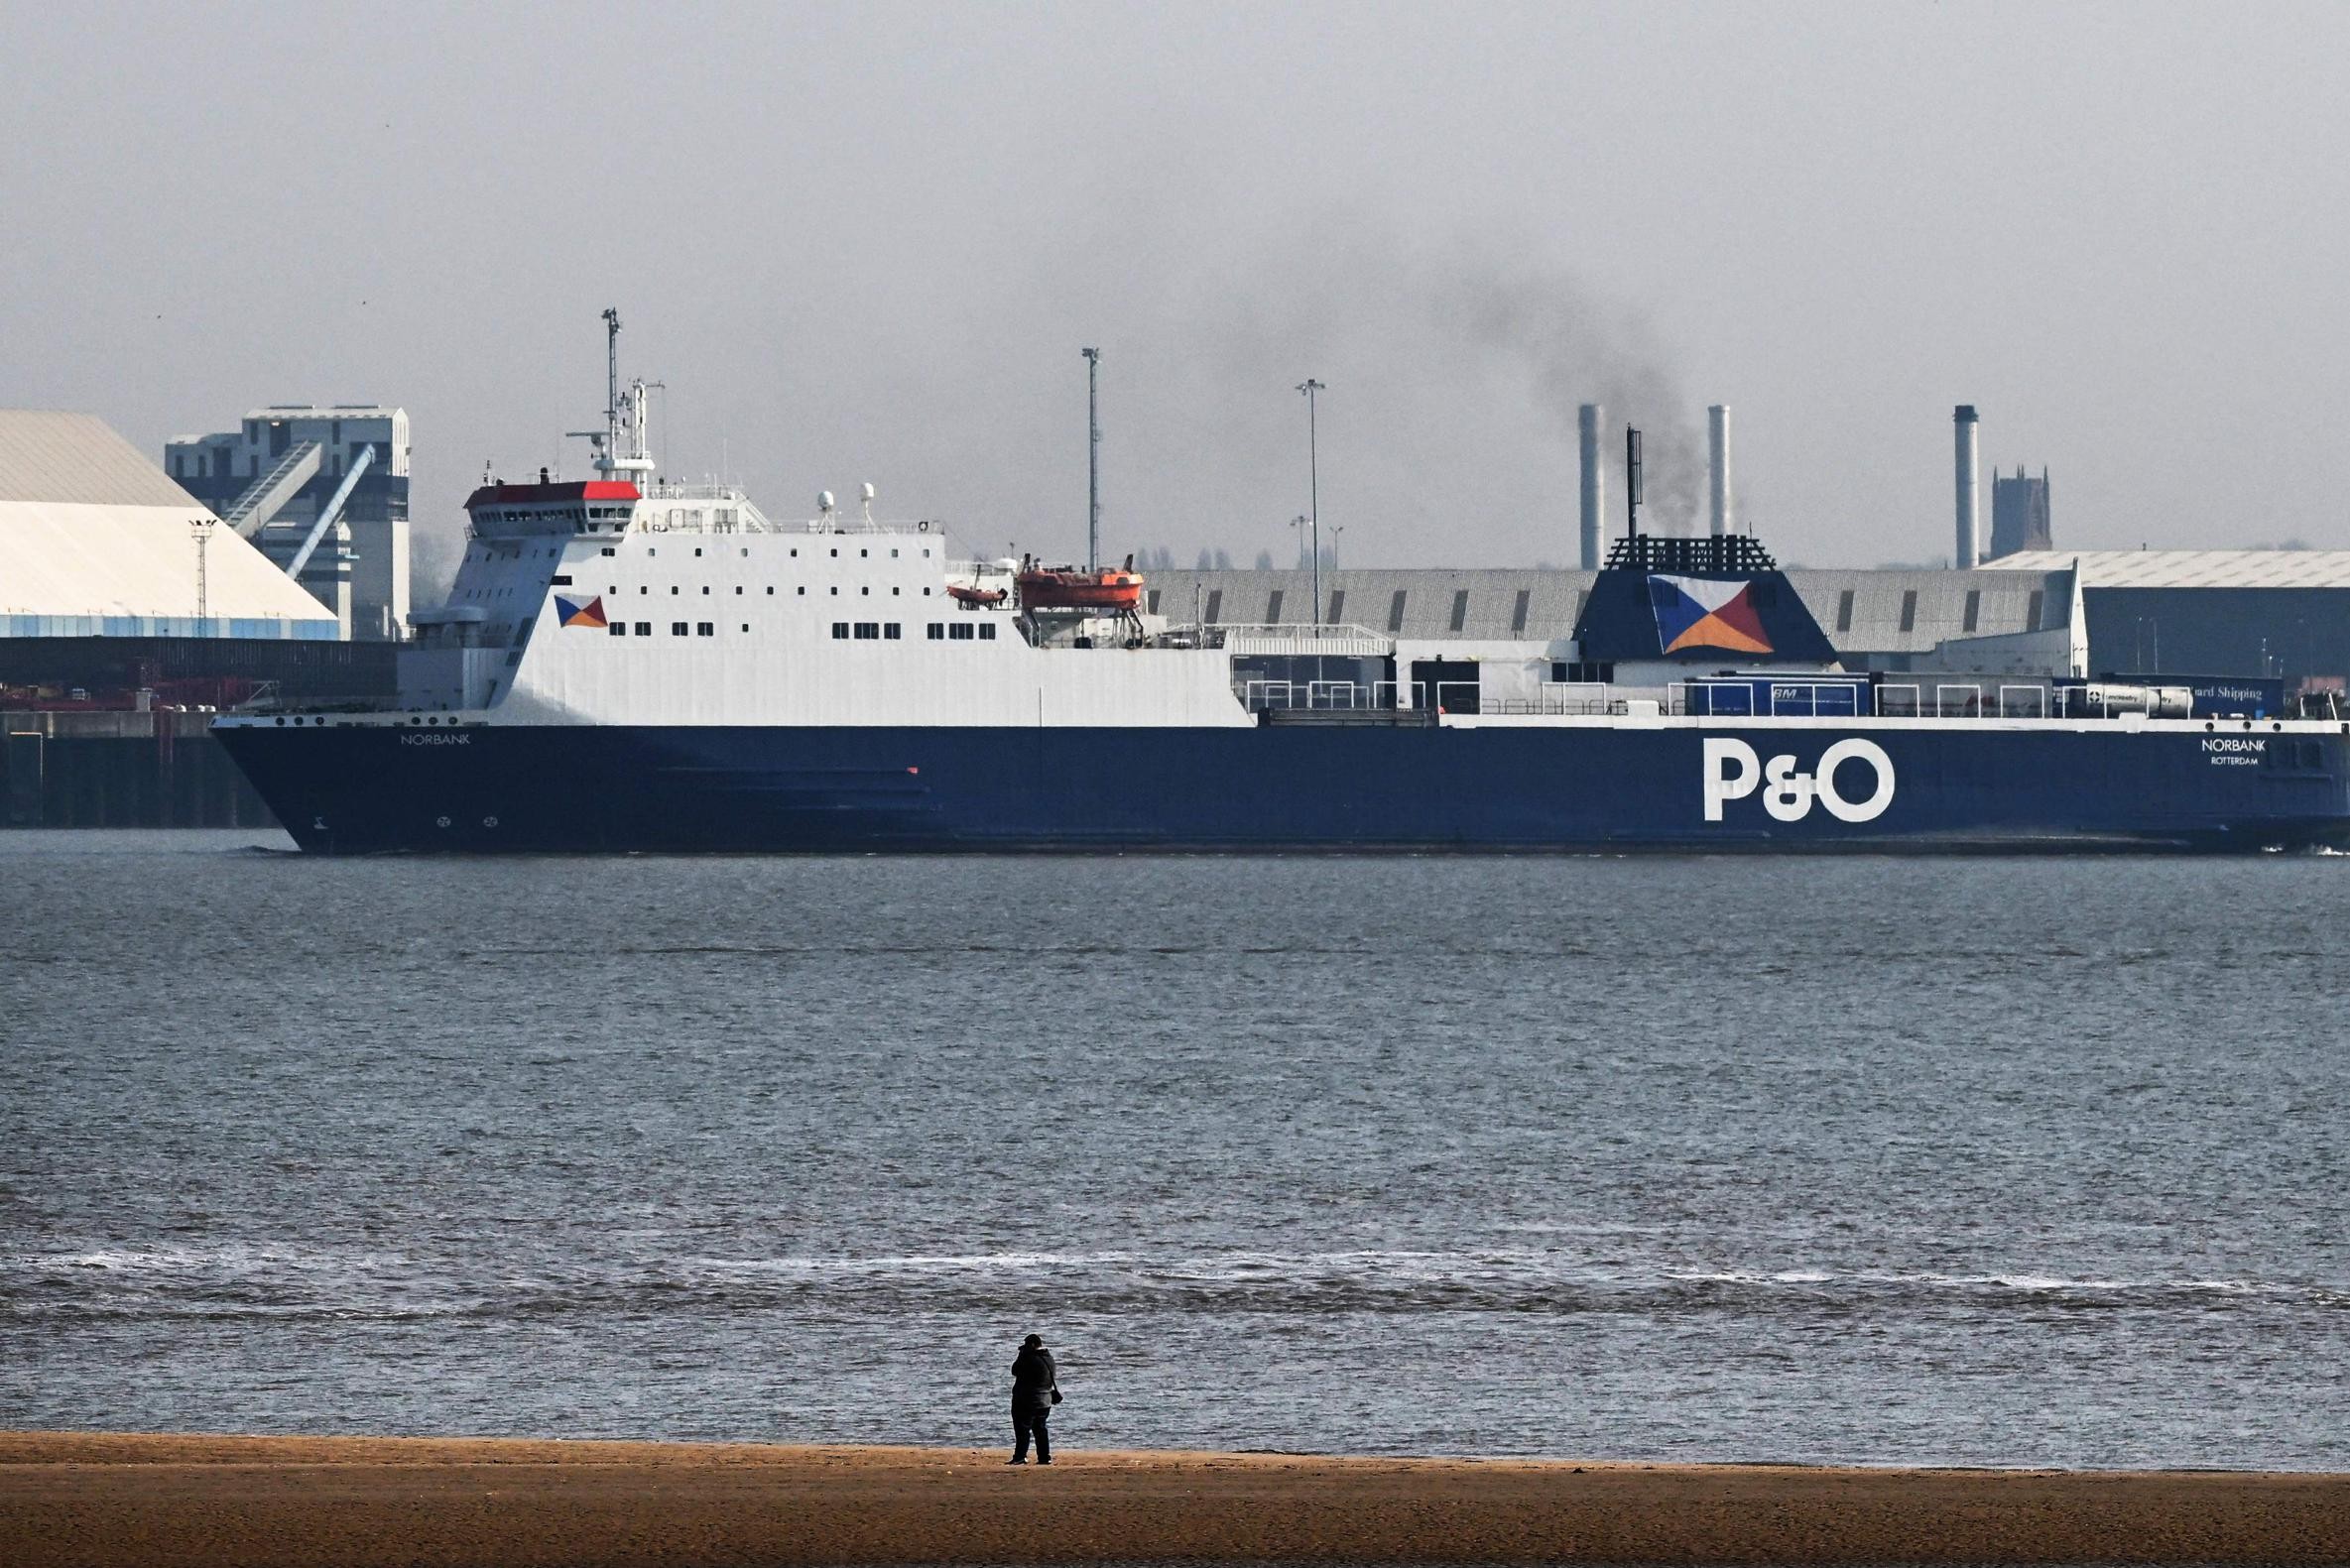 British government takes legal action after mass layoff at P&O: “They can’t get away with this”